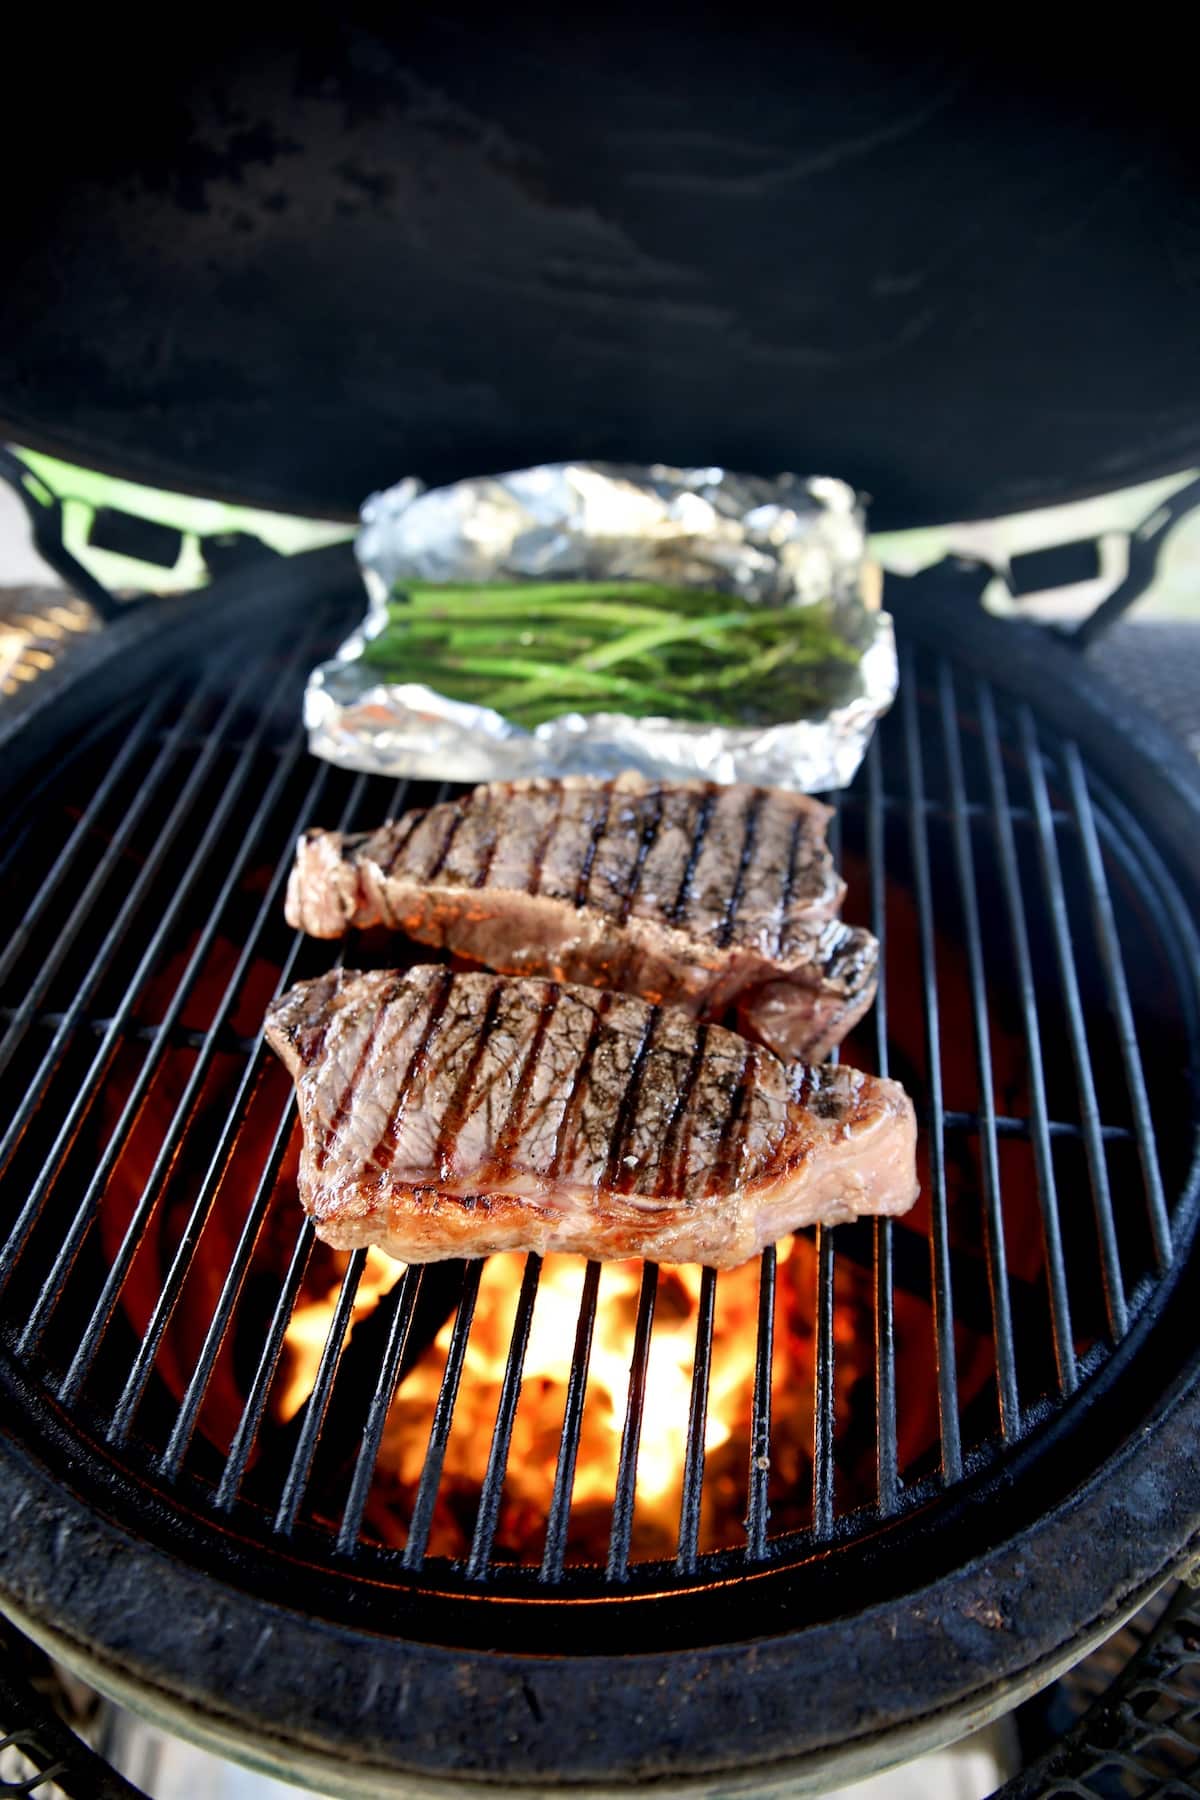 Grilling NY Strip steaks and asparagus.